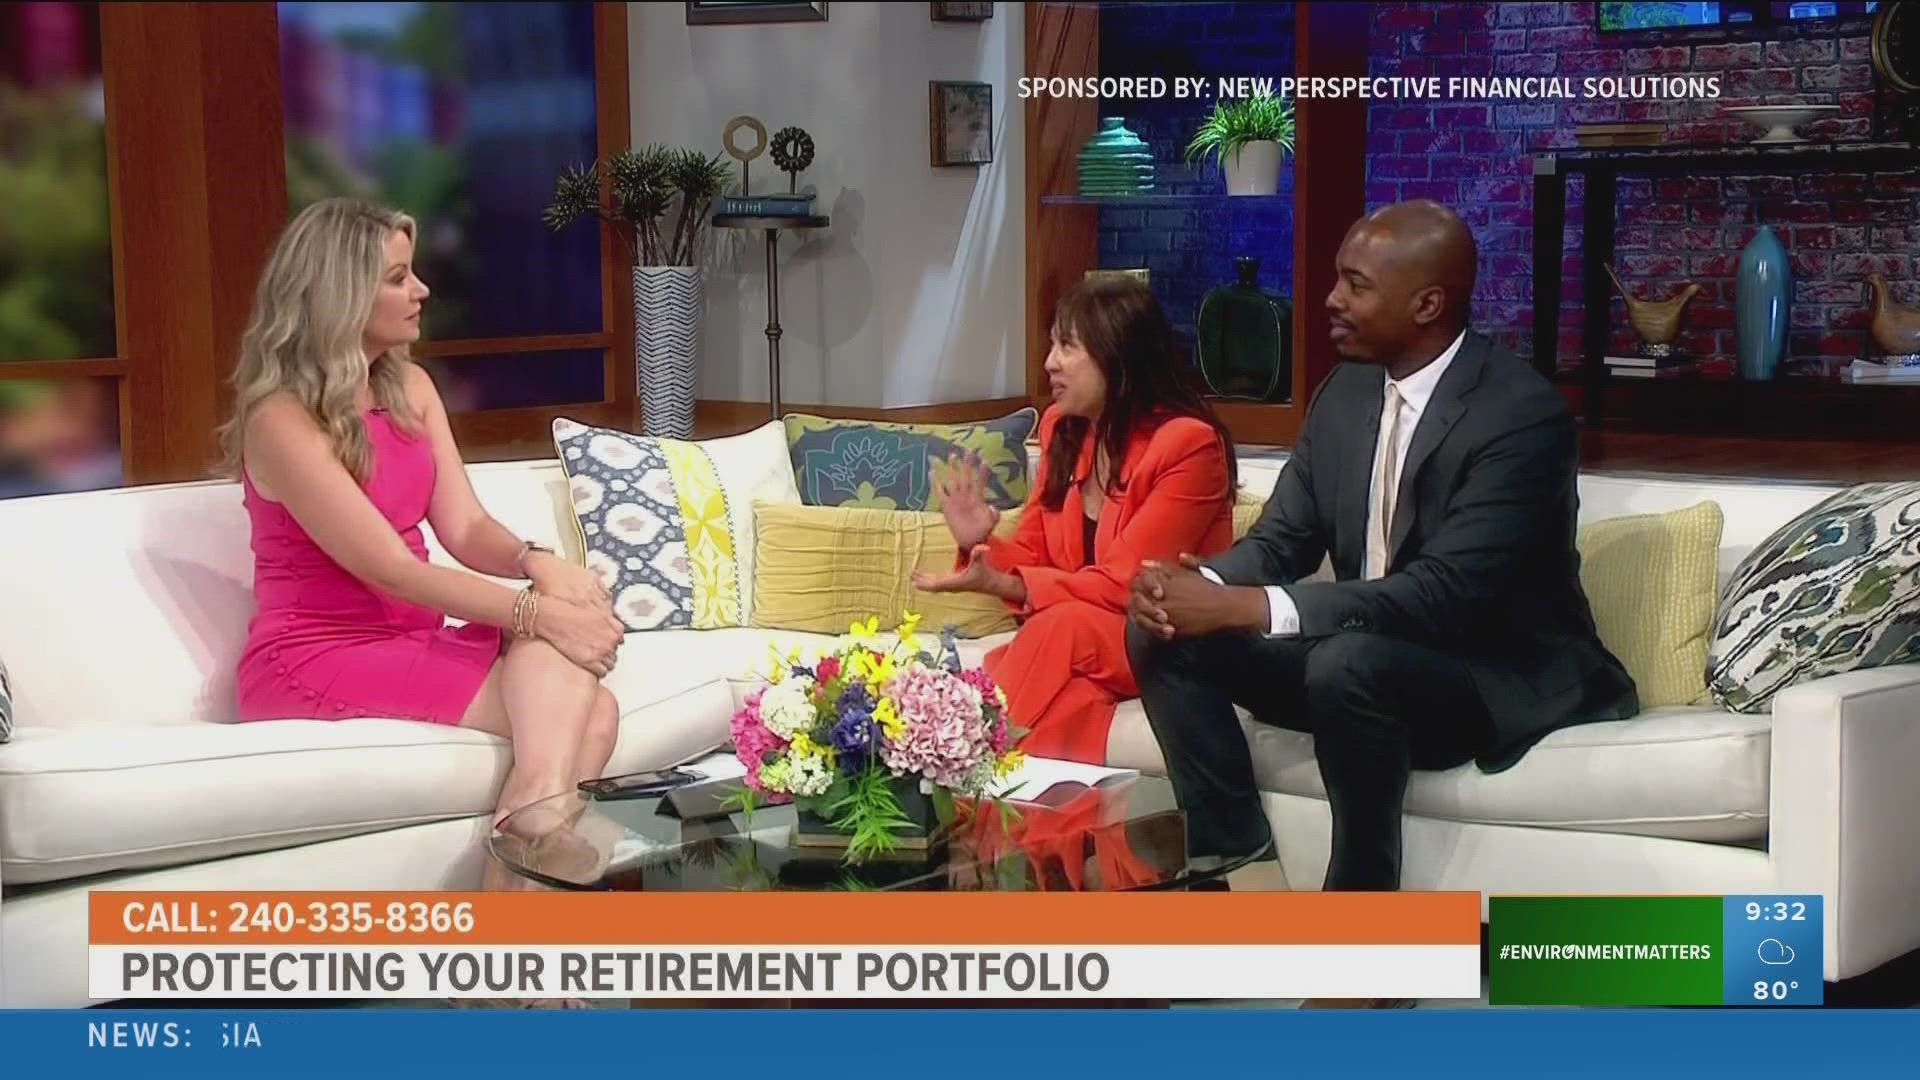 Financial expert Tayvon Jackson shares tips on how you can set up your life insurance to help maximize retirement. Sponsored by New Perspective Financial Solutions.